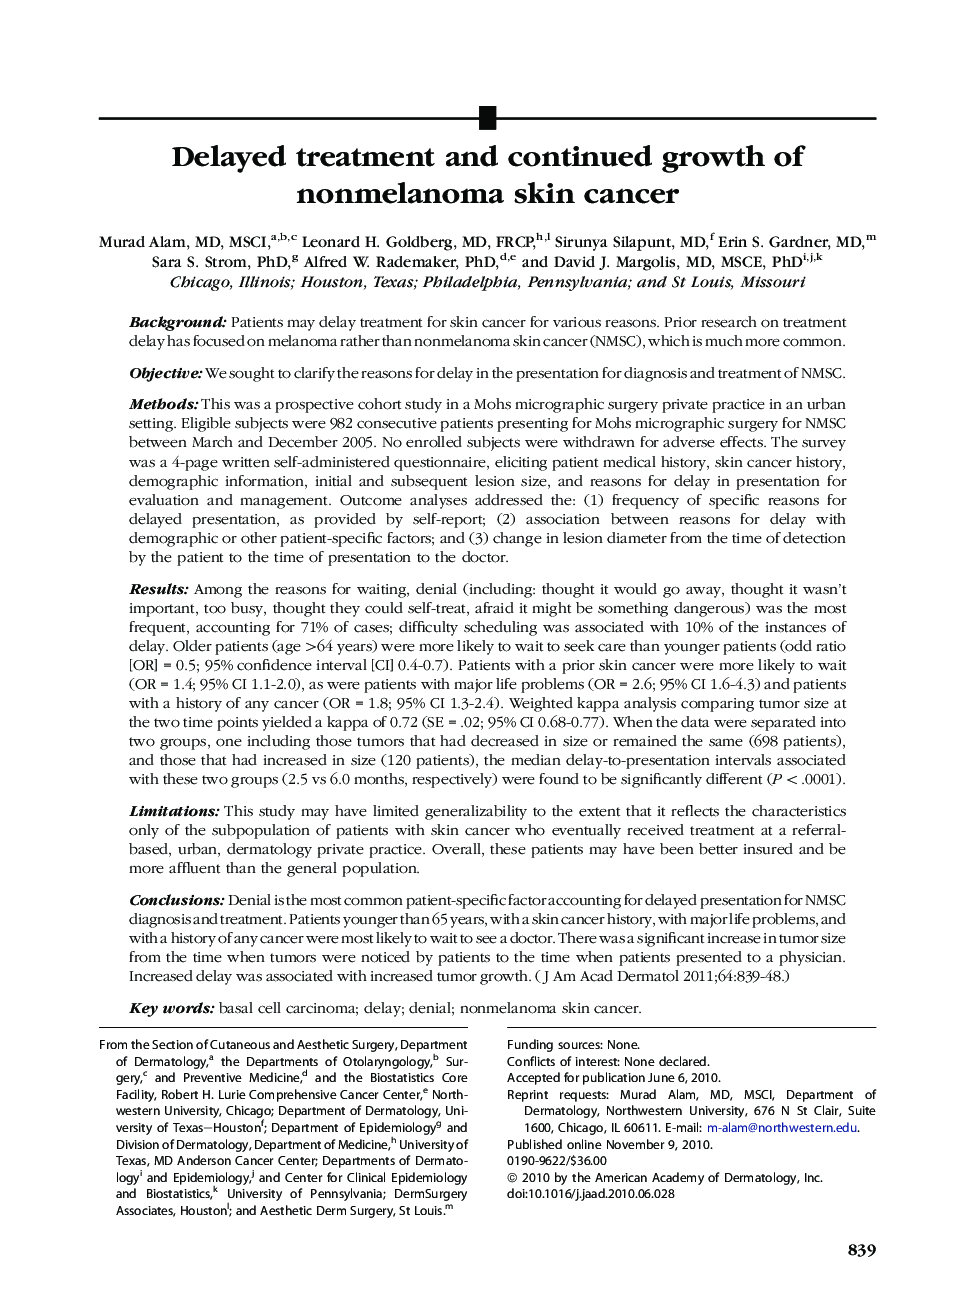 Delayed treatment and continued growth of nonmelanoma skin cancer 